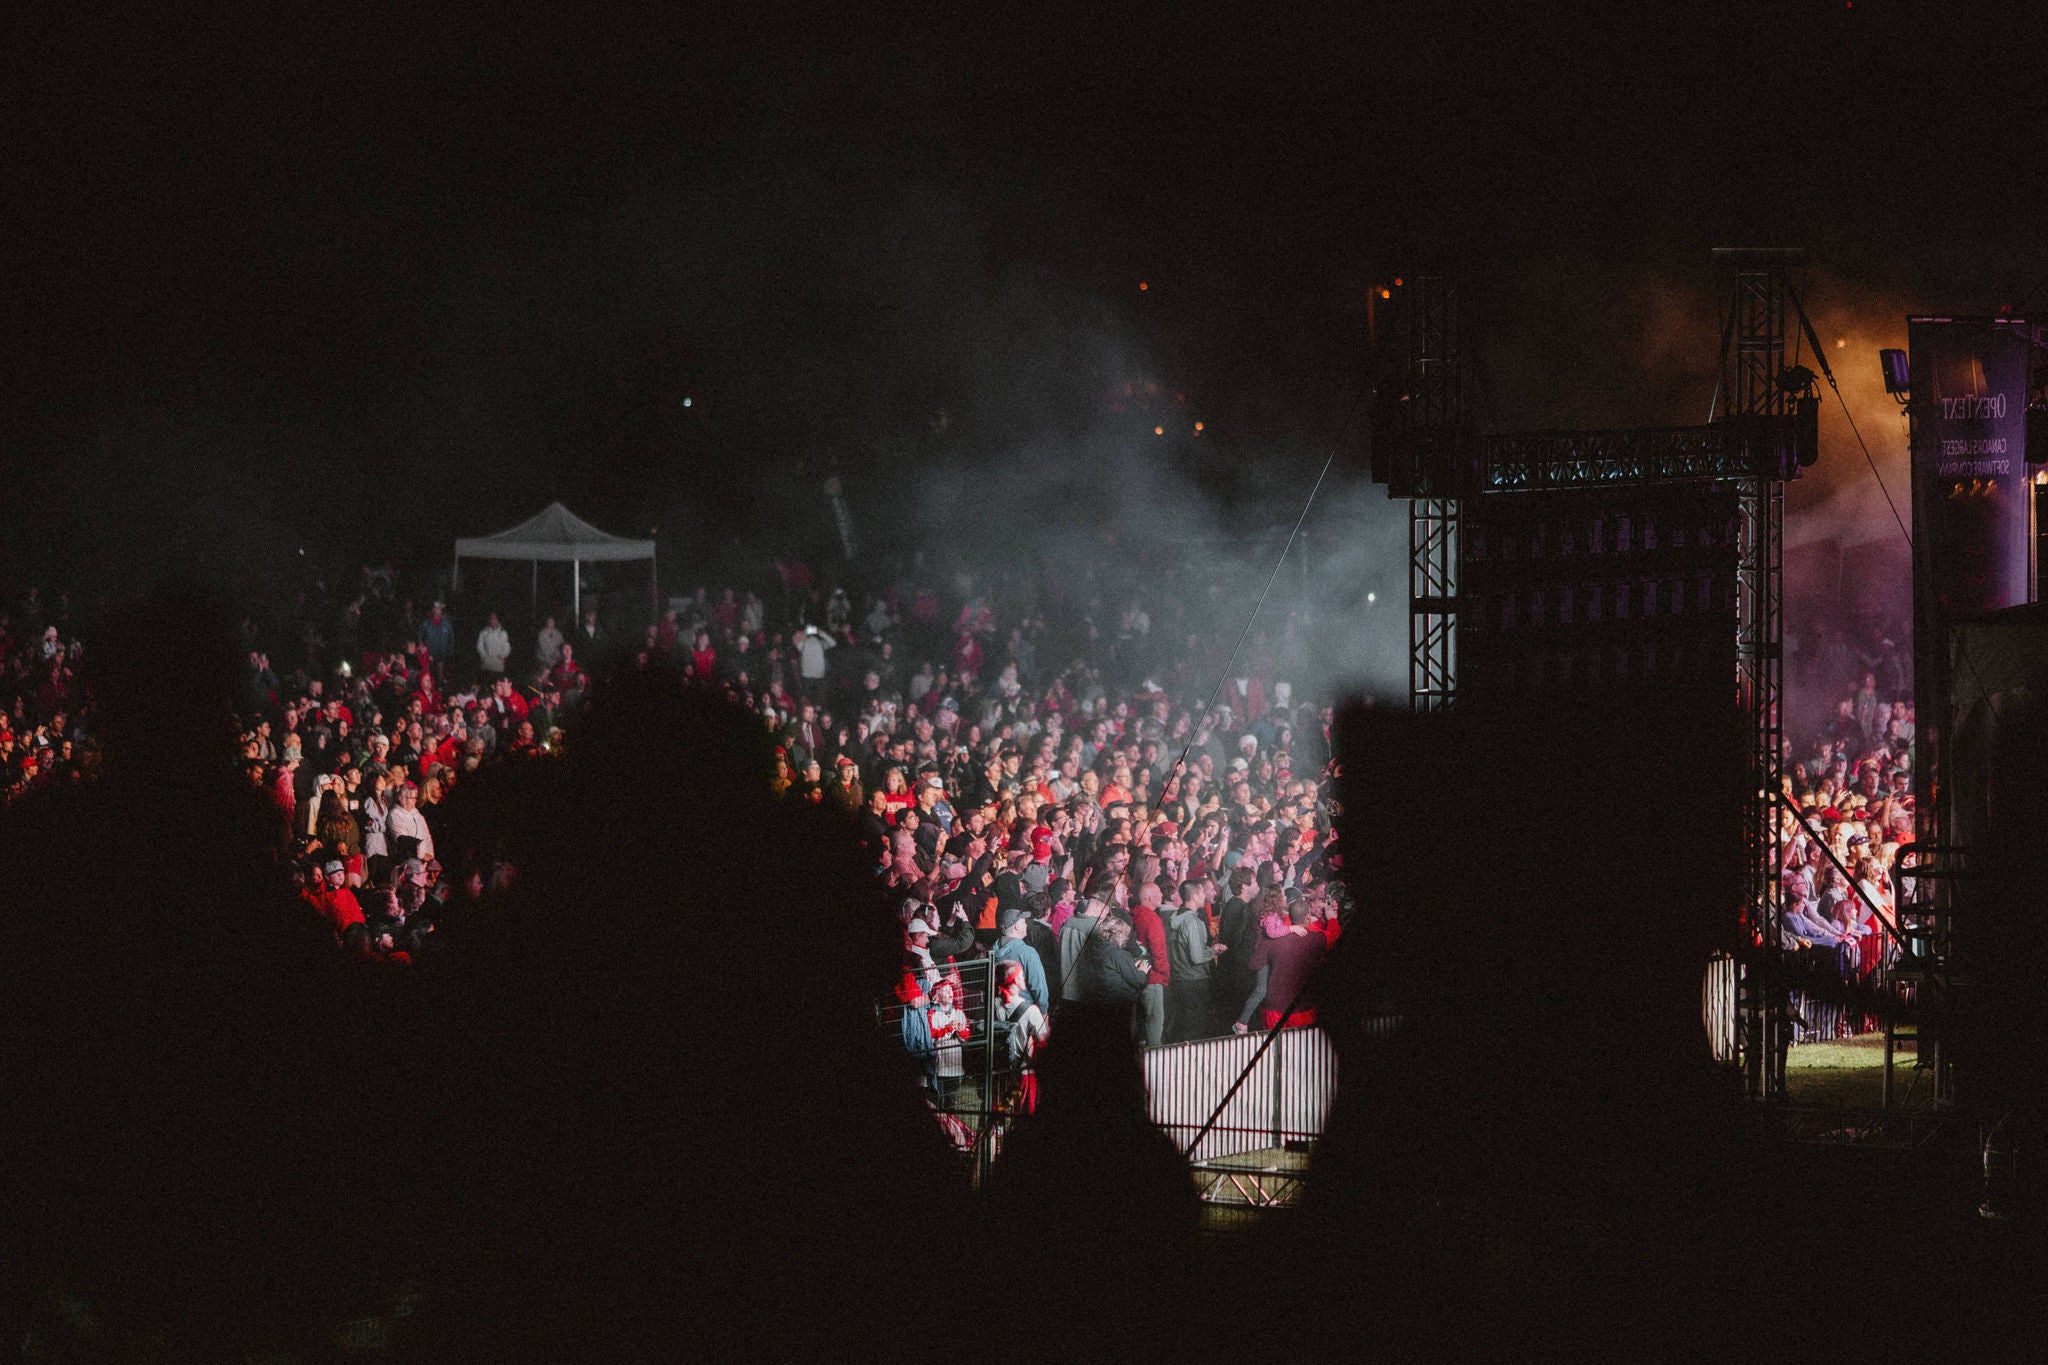 A photo of the crowd on Canada Day enjoying a concert at night, lit by the lights of the main stage.